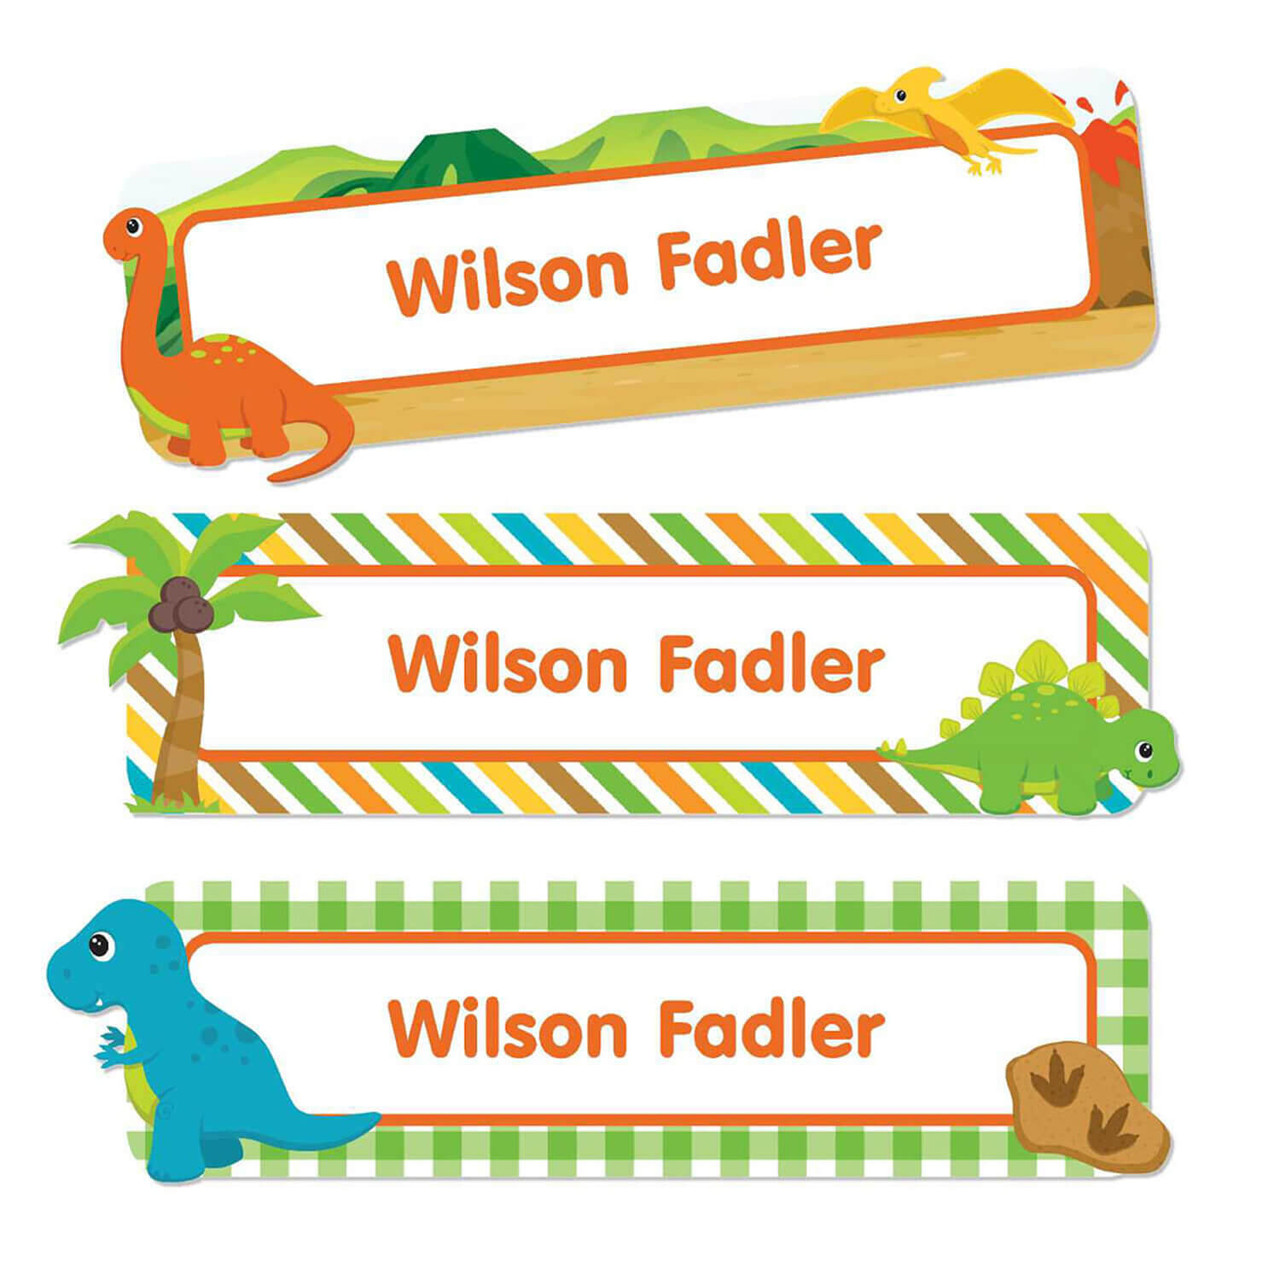 Large Name Labels for Kids, Large Name Stickers